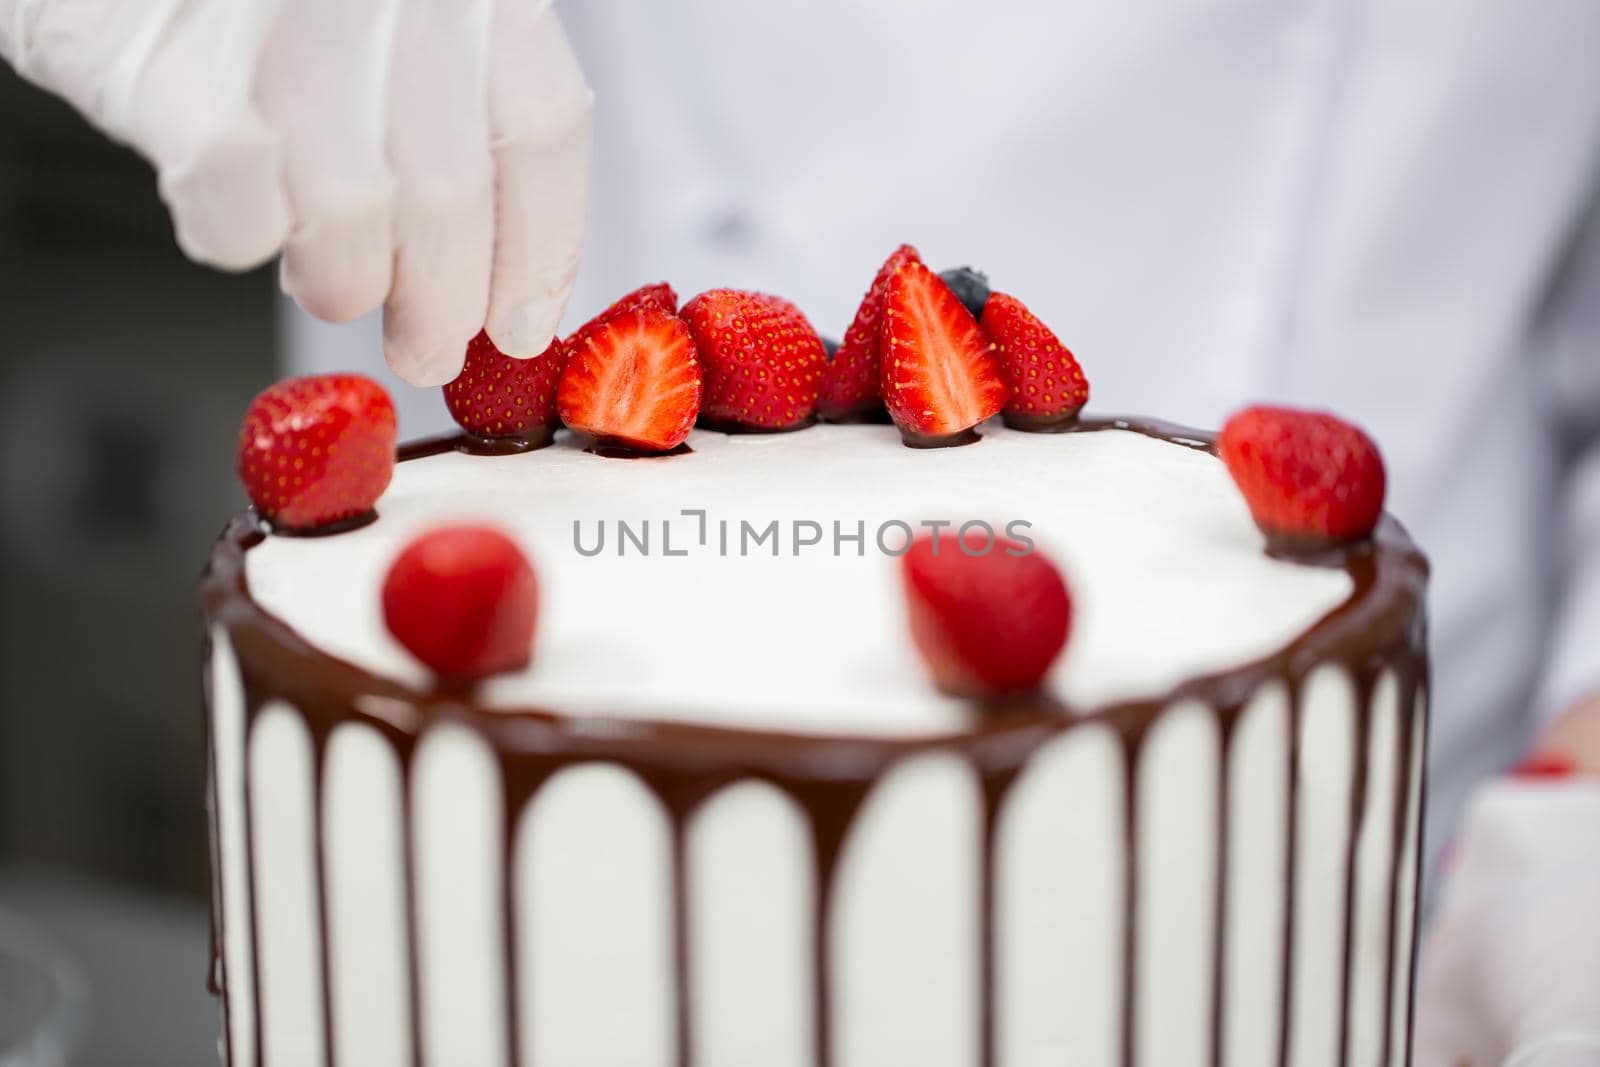 Pastry chef decorates the cake with chocolate streaks of strawberries by StudioPeace